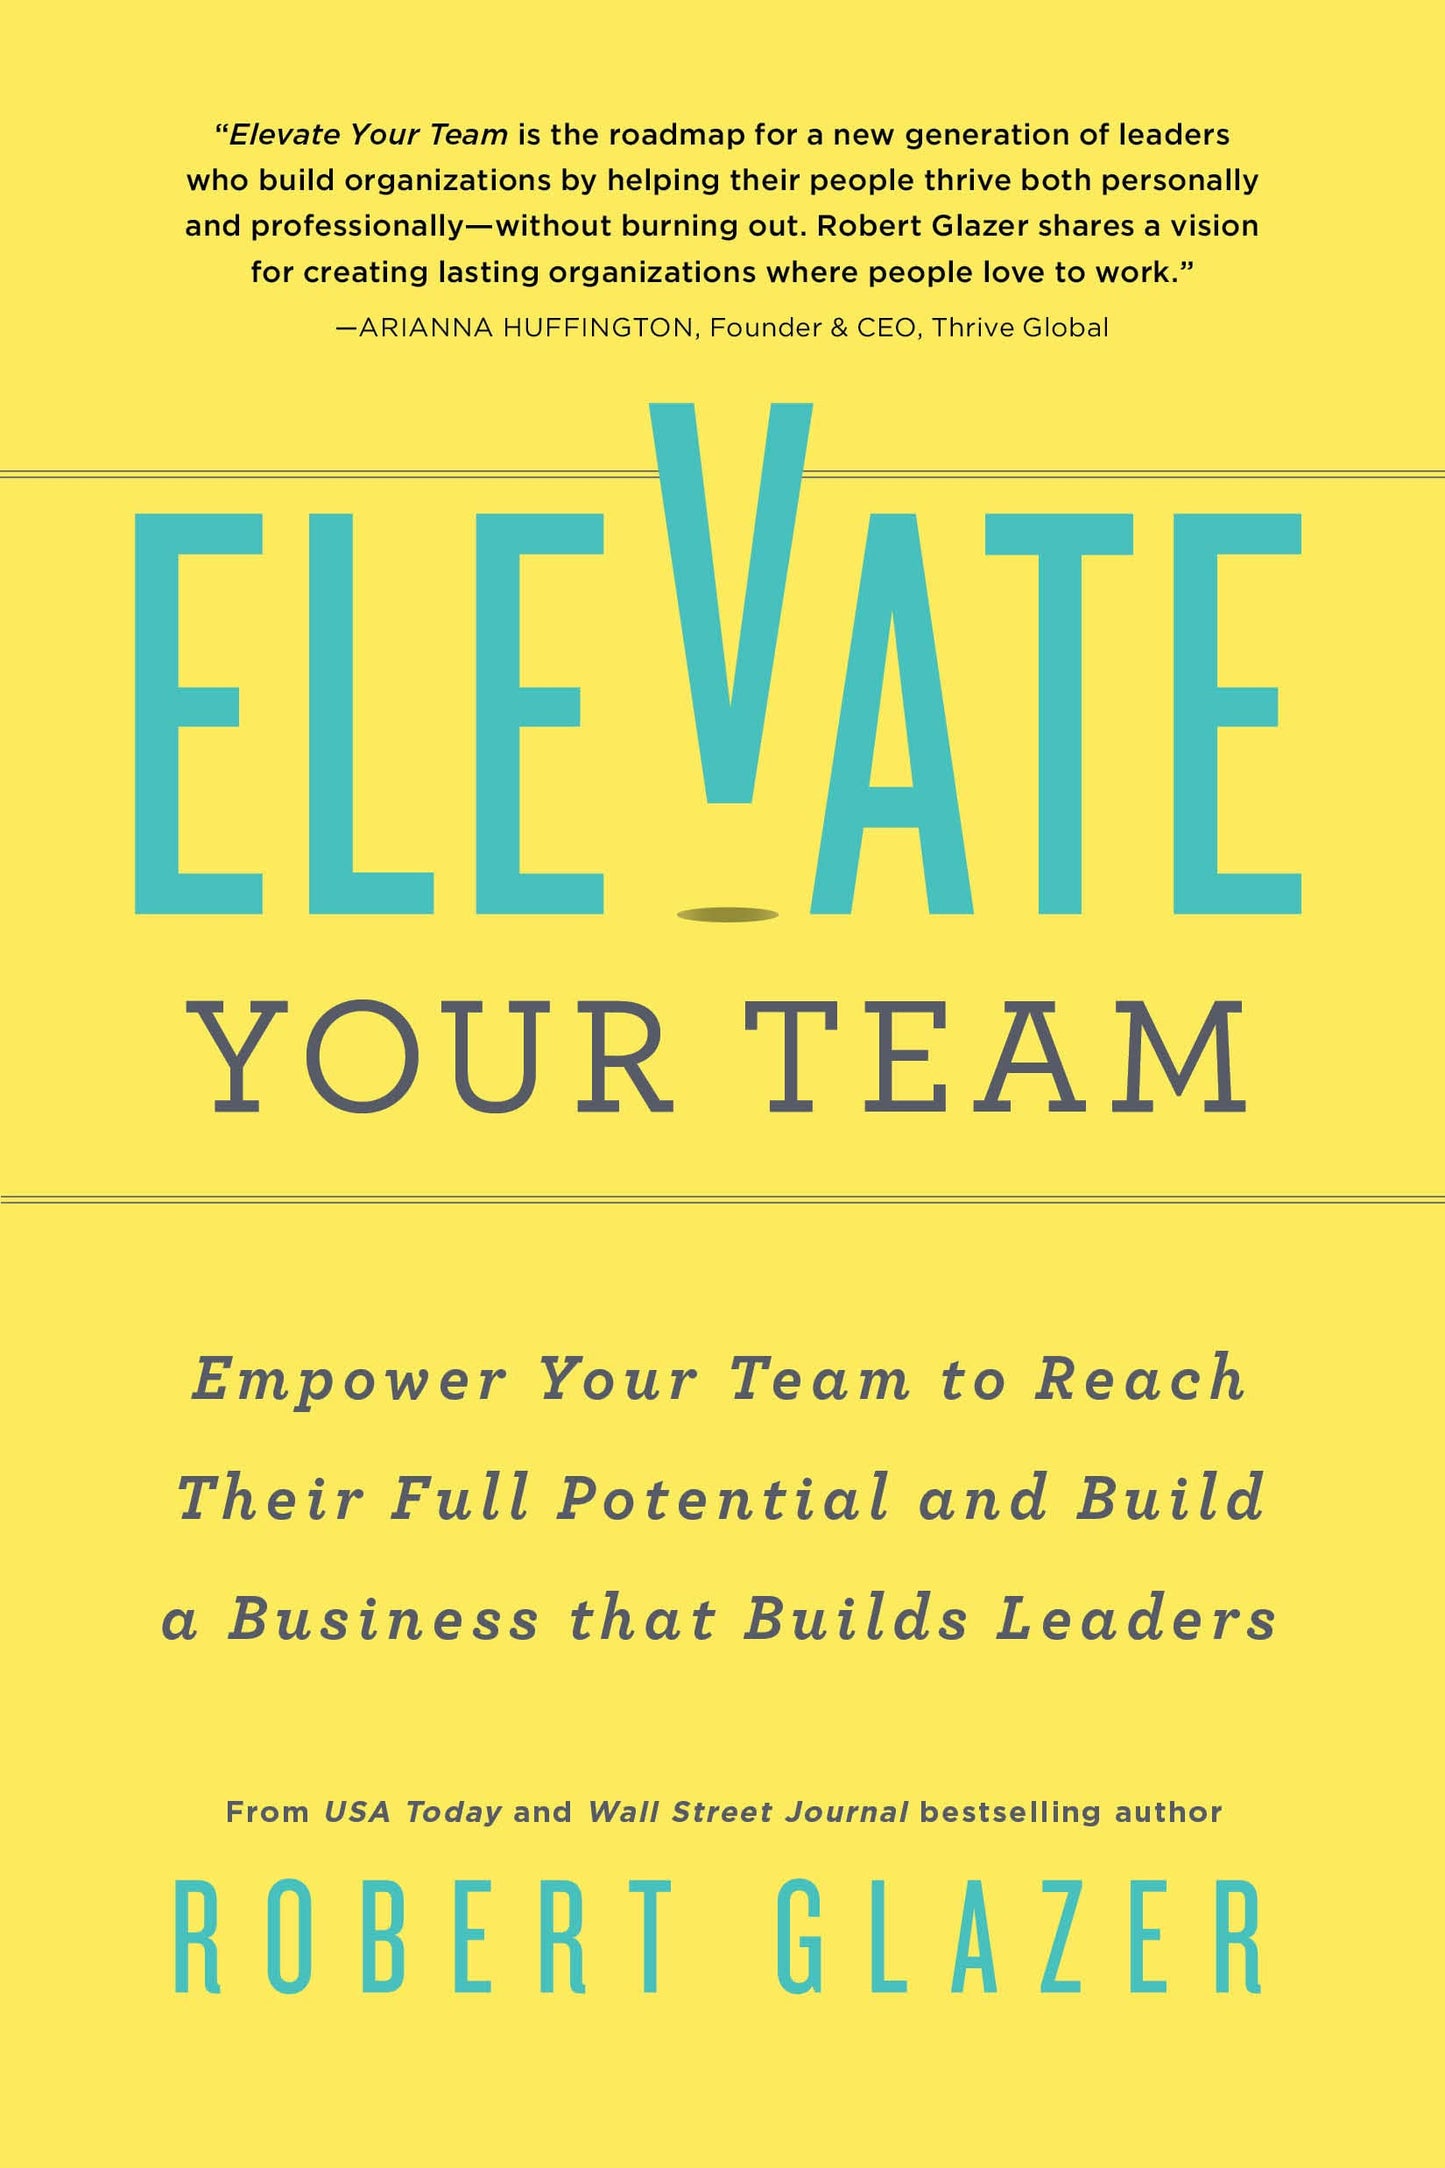 ELEVATE YOUR TEAM